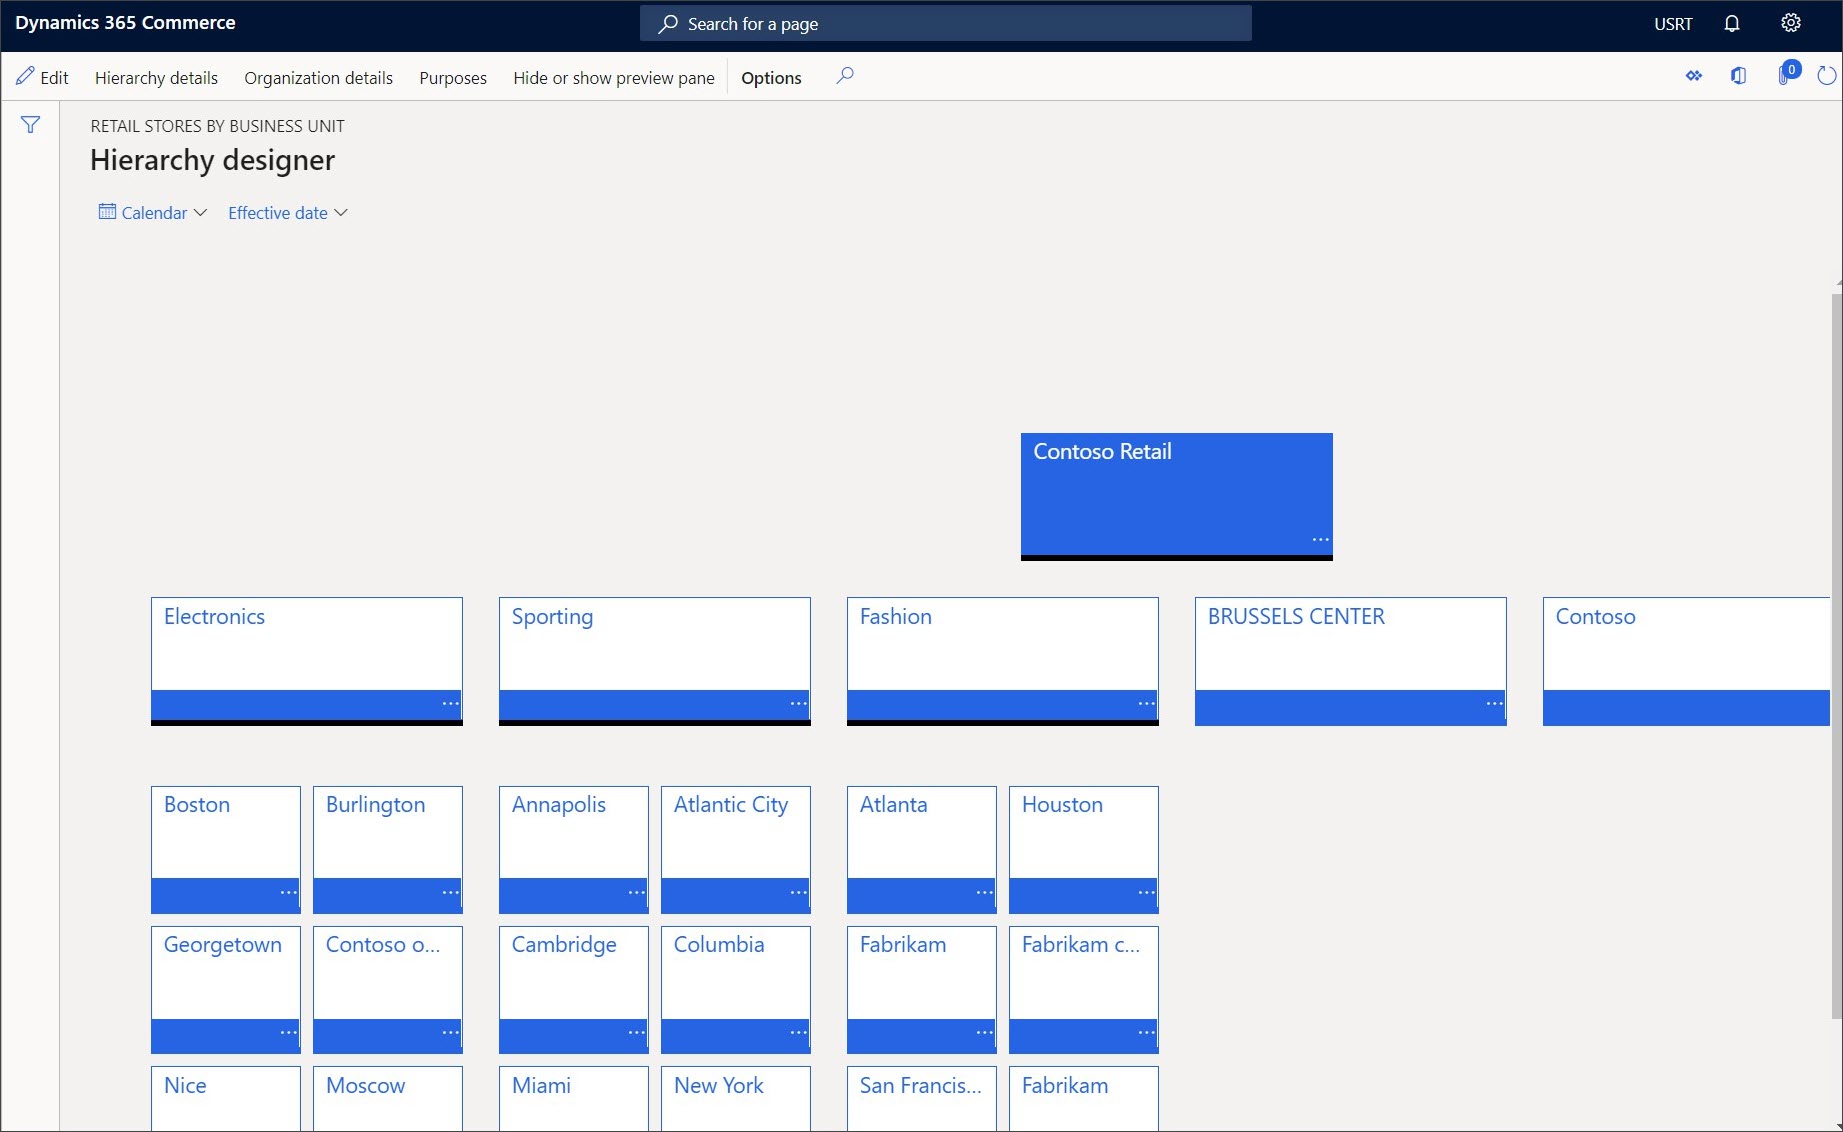 Screenshot of the Hierarchy designer page